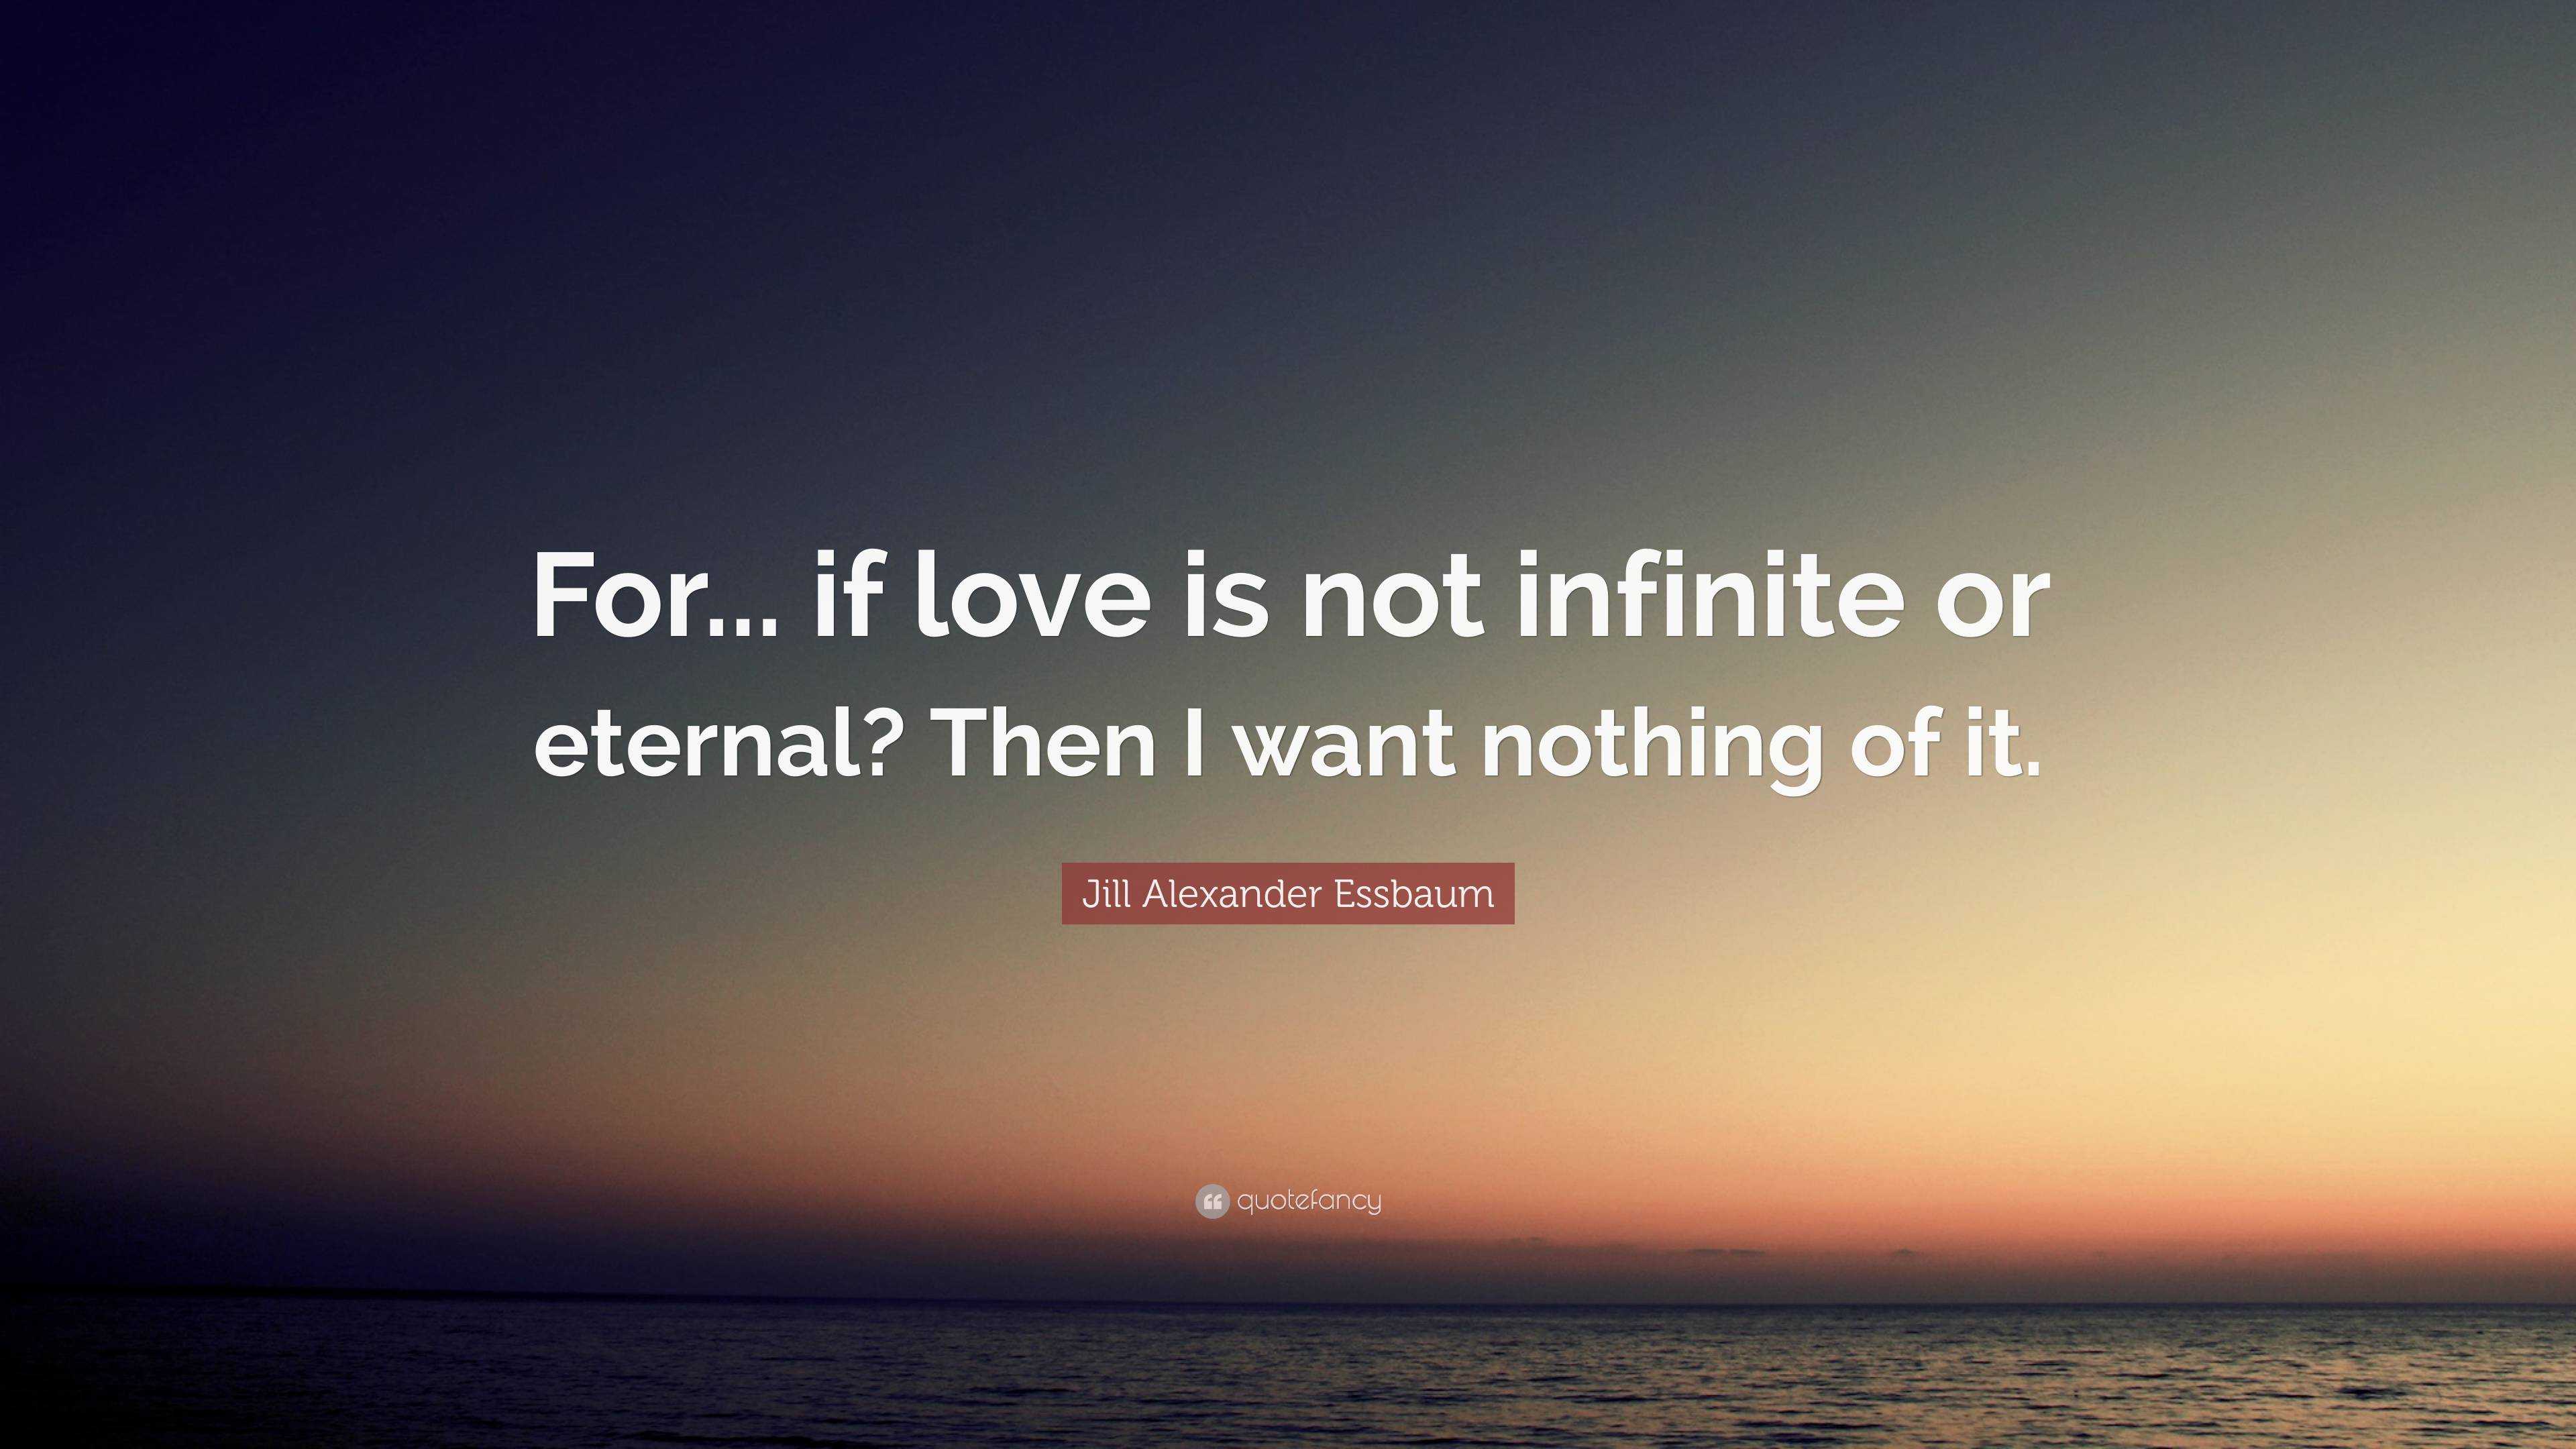 Jill Alexander Essbaum Quote: “For... if love is not infinite or ...